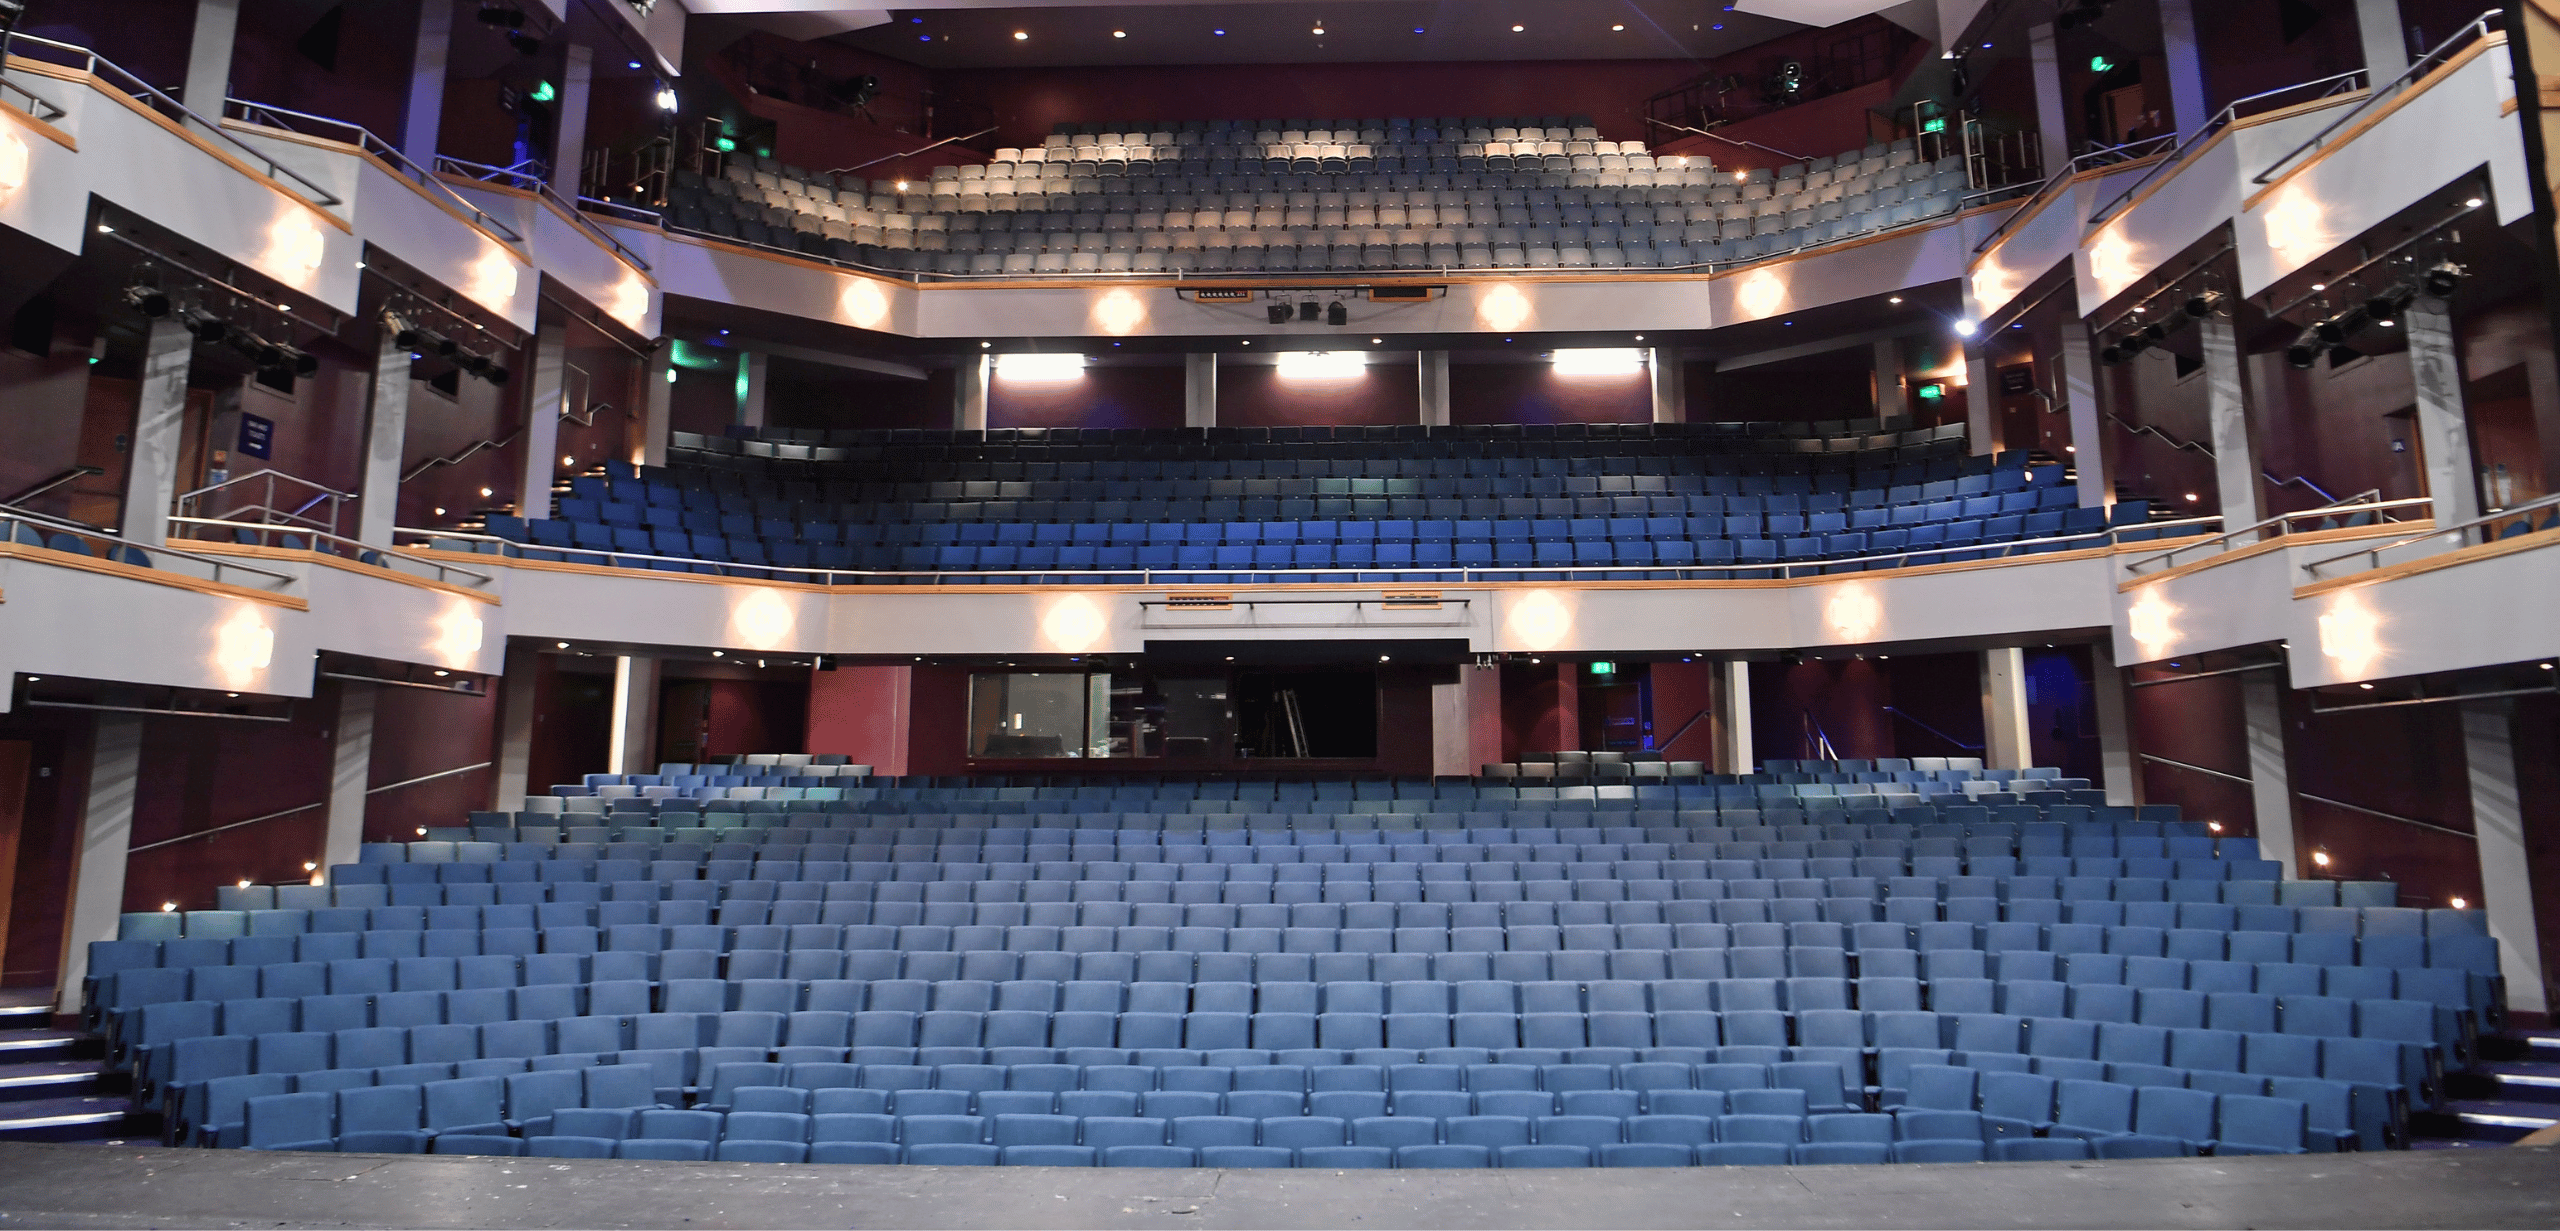 An auditorium with rows of blue theater style seating.